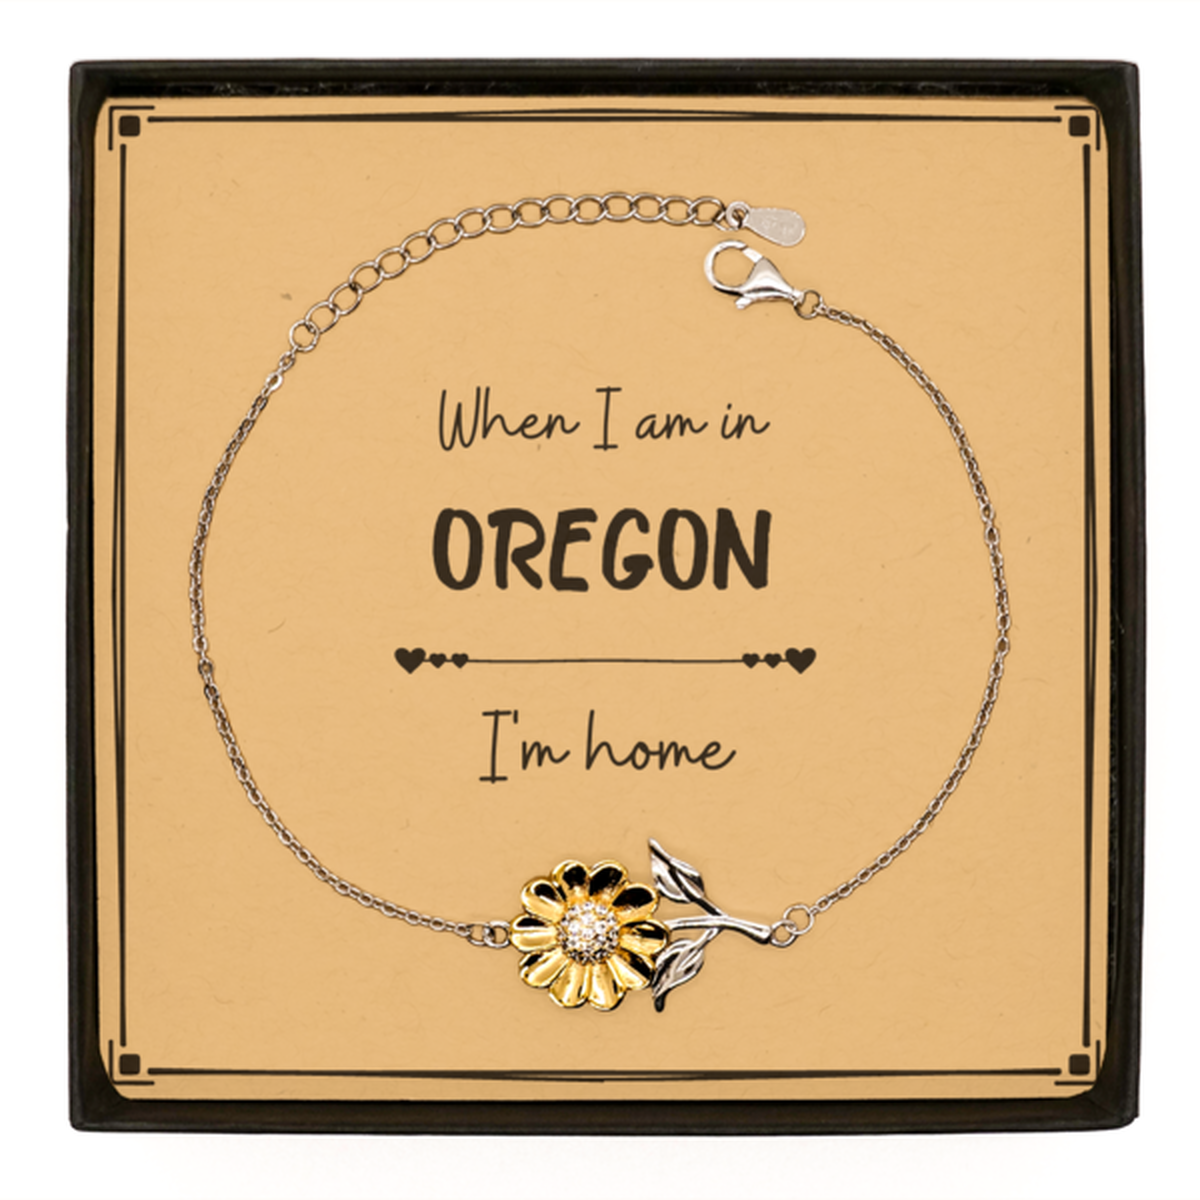 When I am in Oregon I'm home Sunflower Bracelet, Message Card Gifts For Oregon, State Oregon Birthday Gifts for Friends Coworker